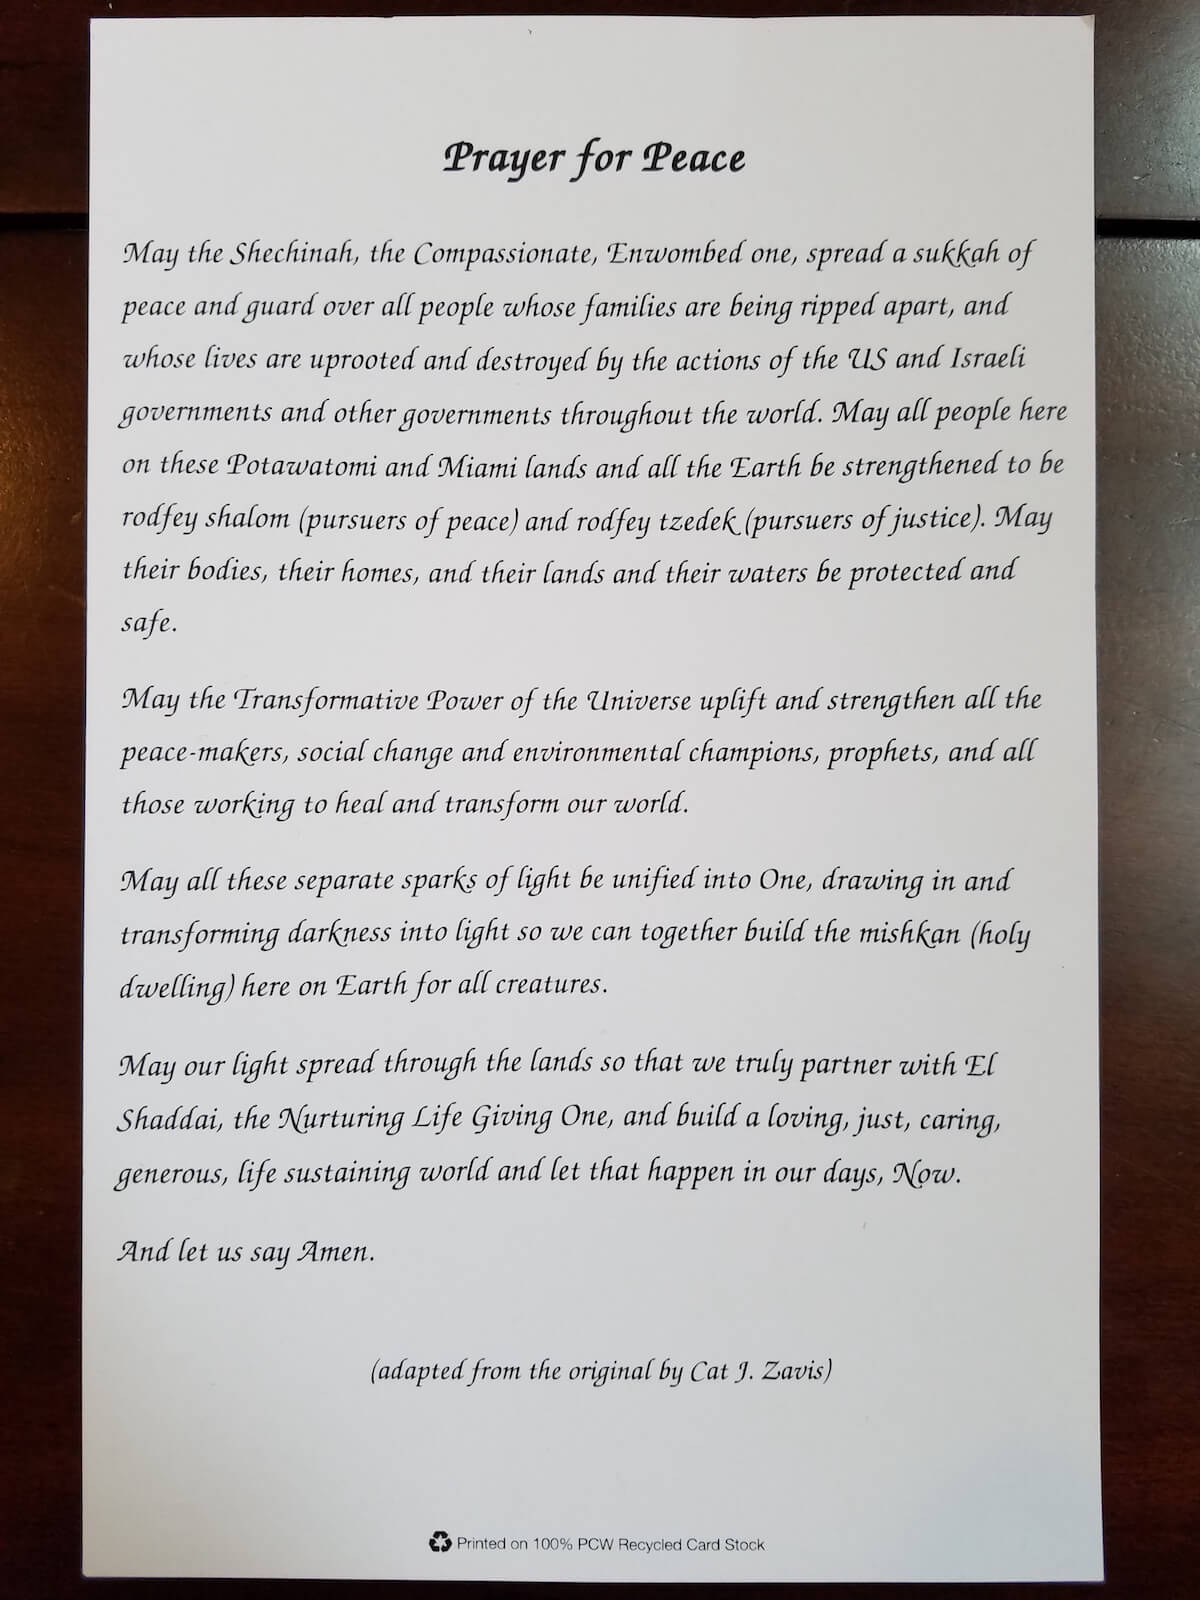 A copy of the Prayer for Peace that Dan Fischer distributed at his synogogue.